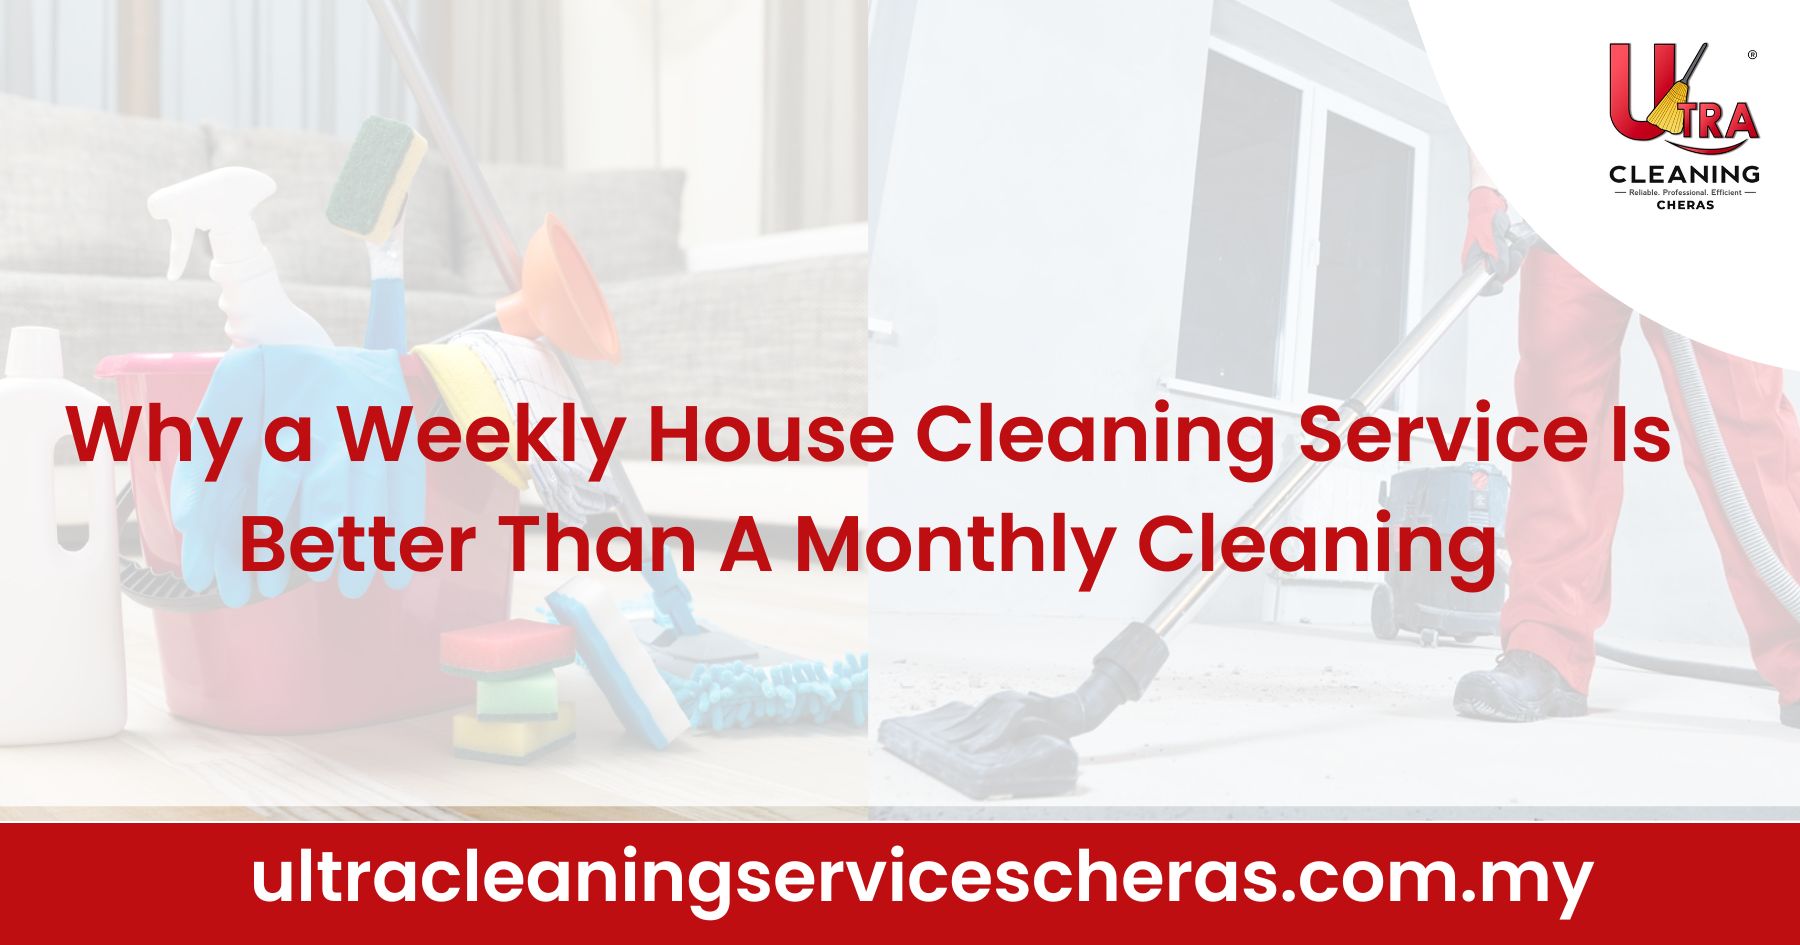 Why Weekly Cleaning Service is Better Than Monthly Cleaning